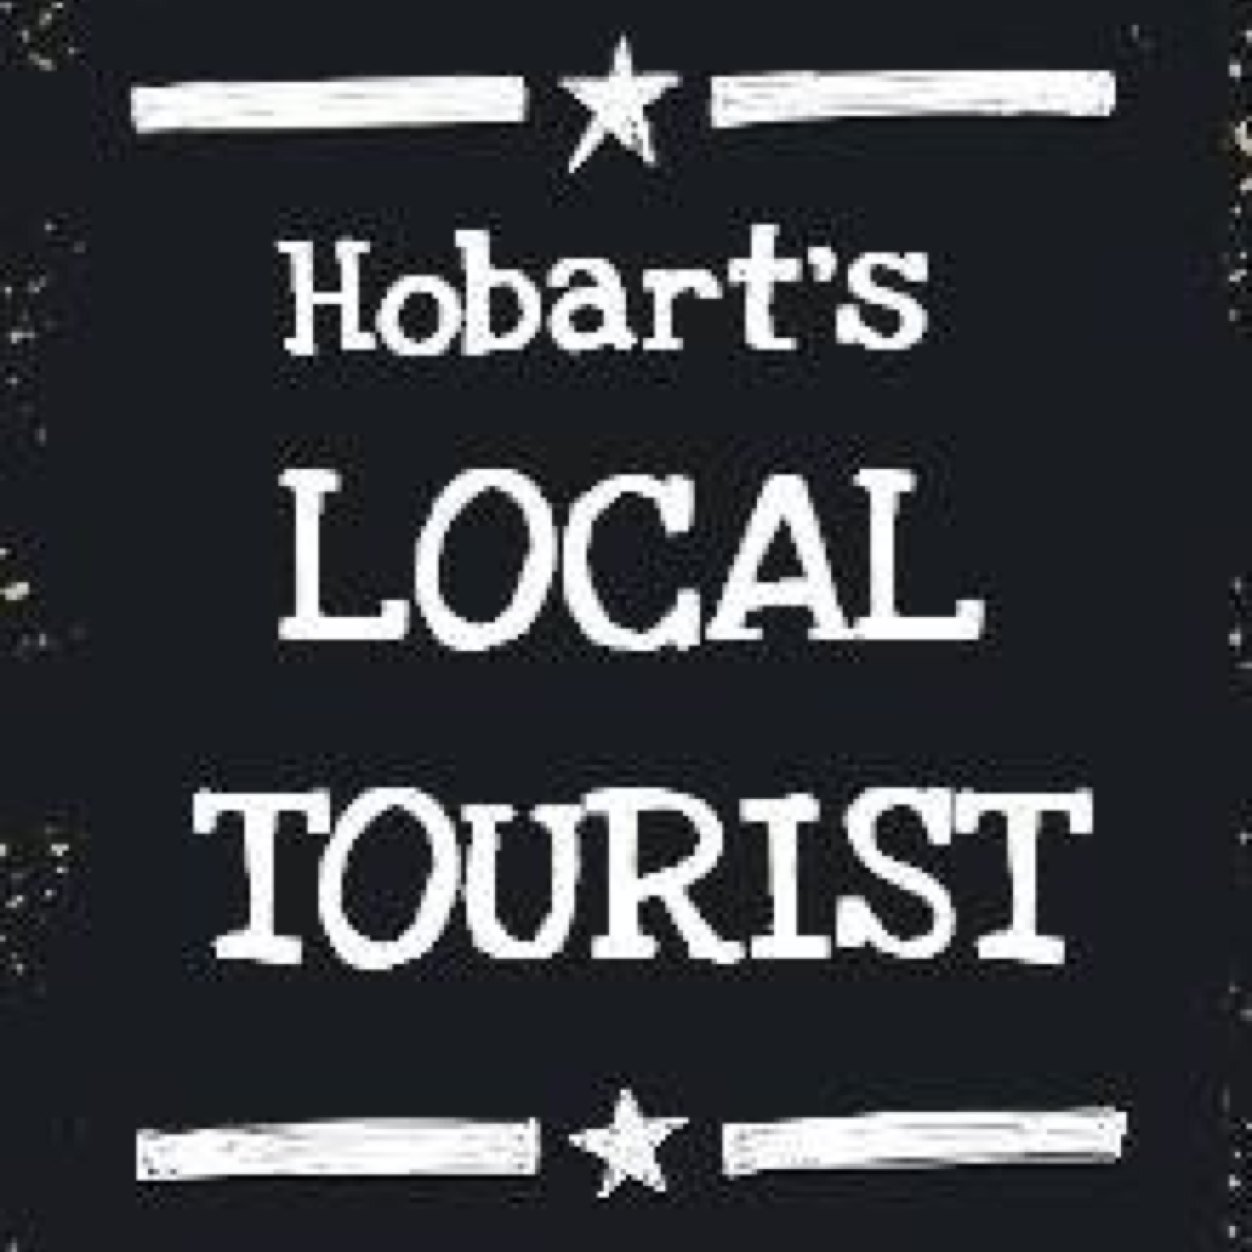 http://t.co/ssJAZh3TPK is a review website that features the best bars, cafes, restaurants, shops, tours and attractions in Hobart, Tasmania.